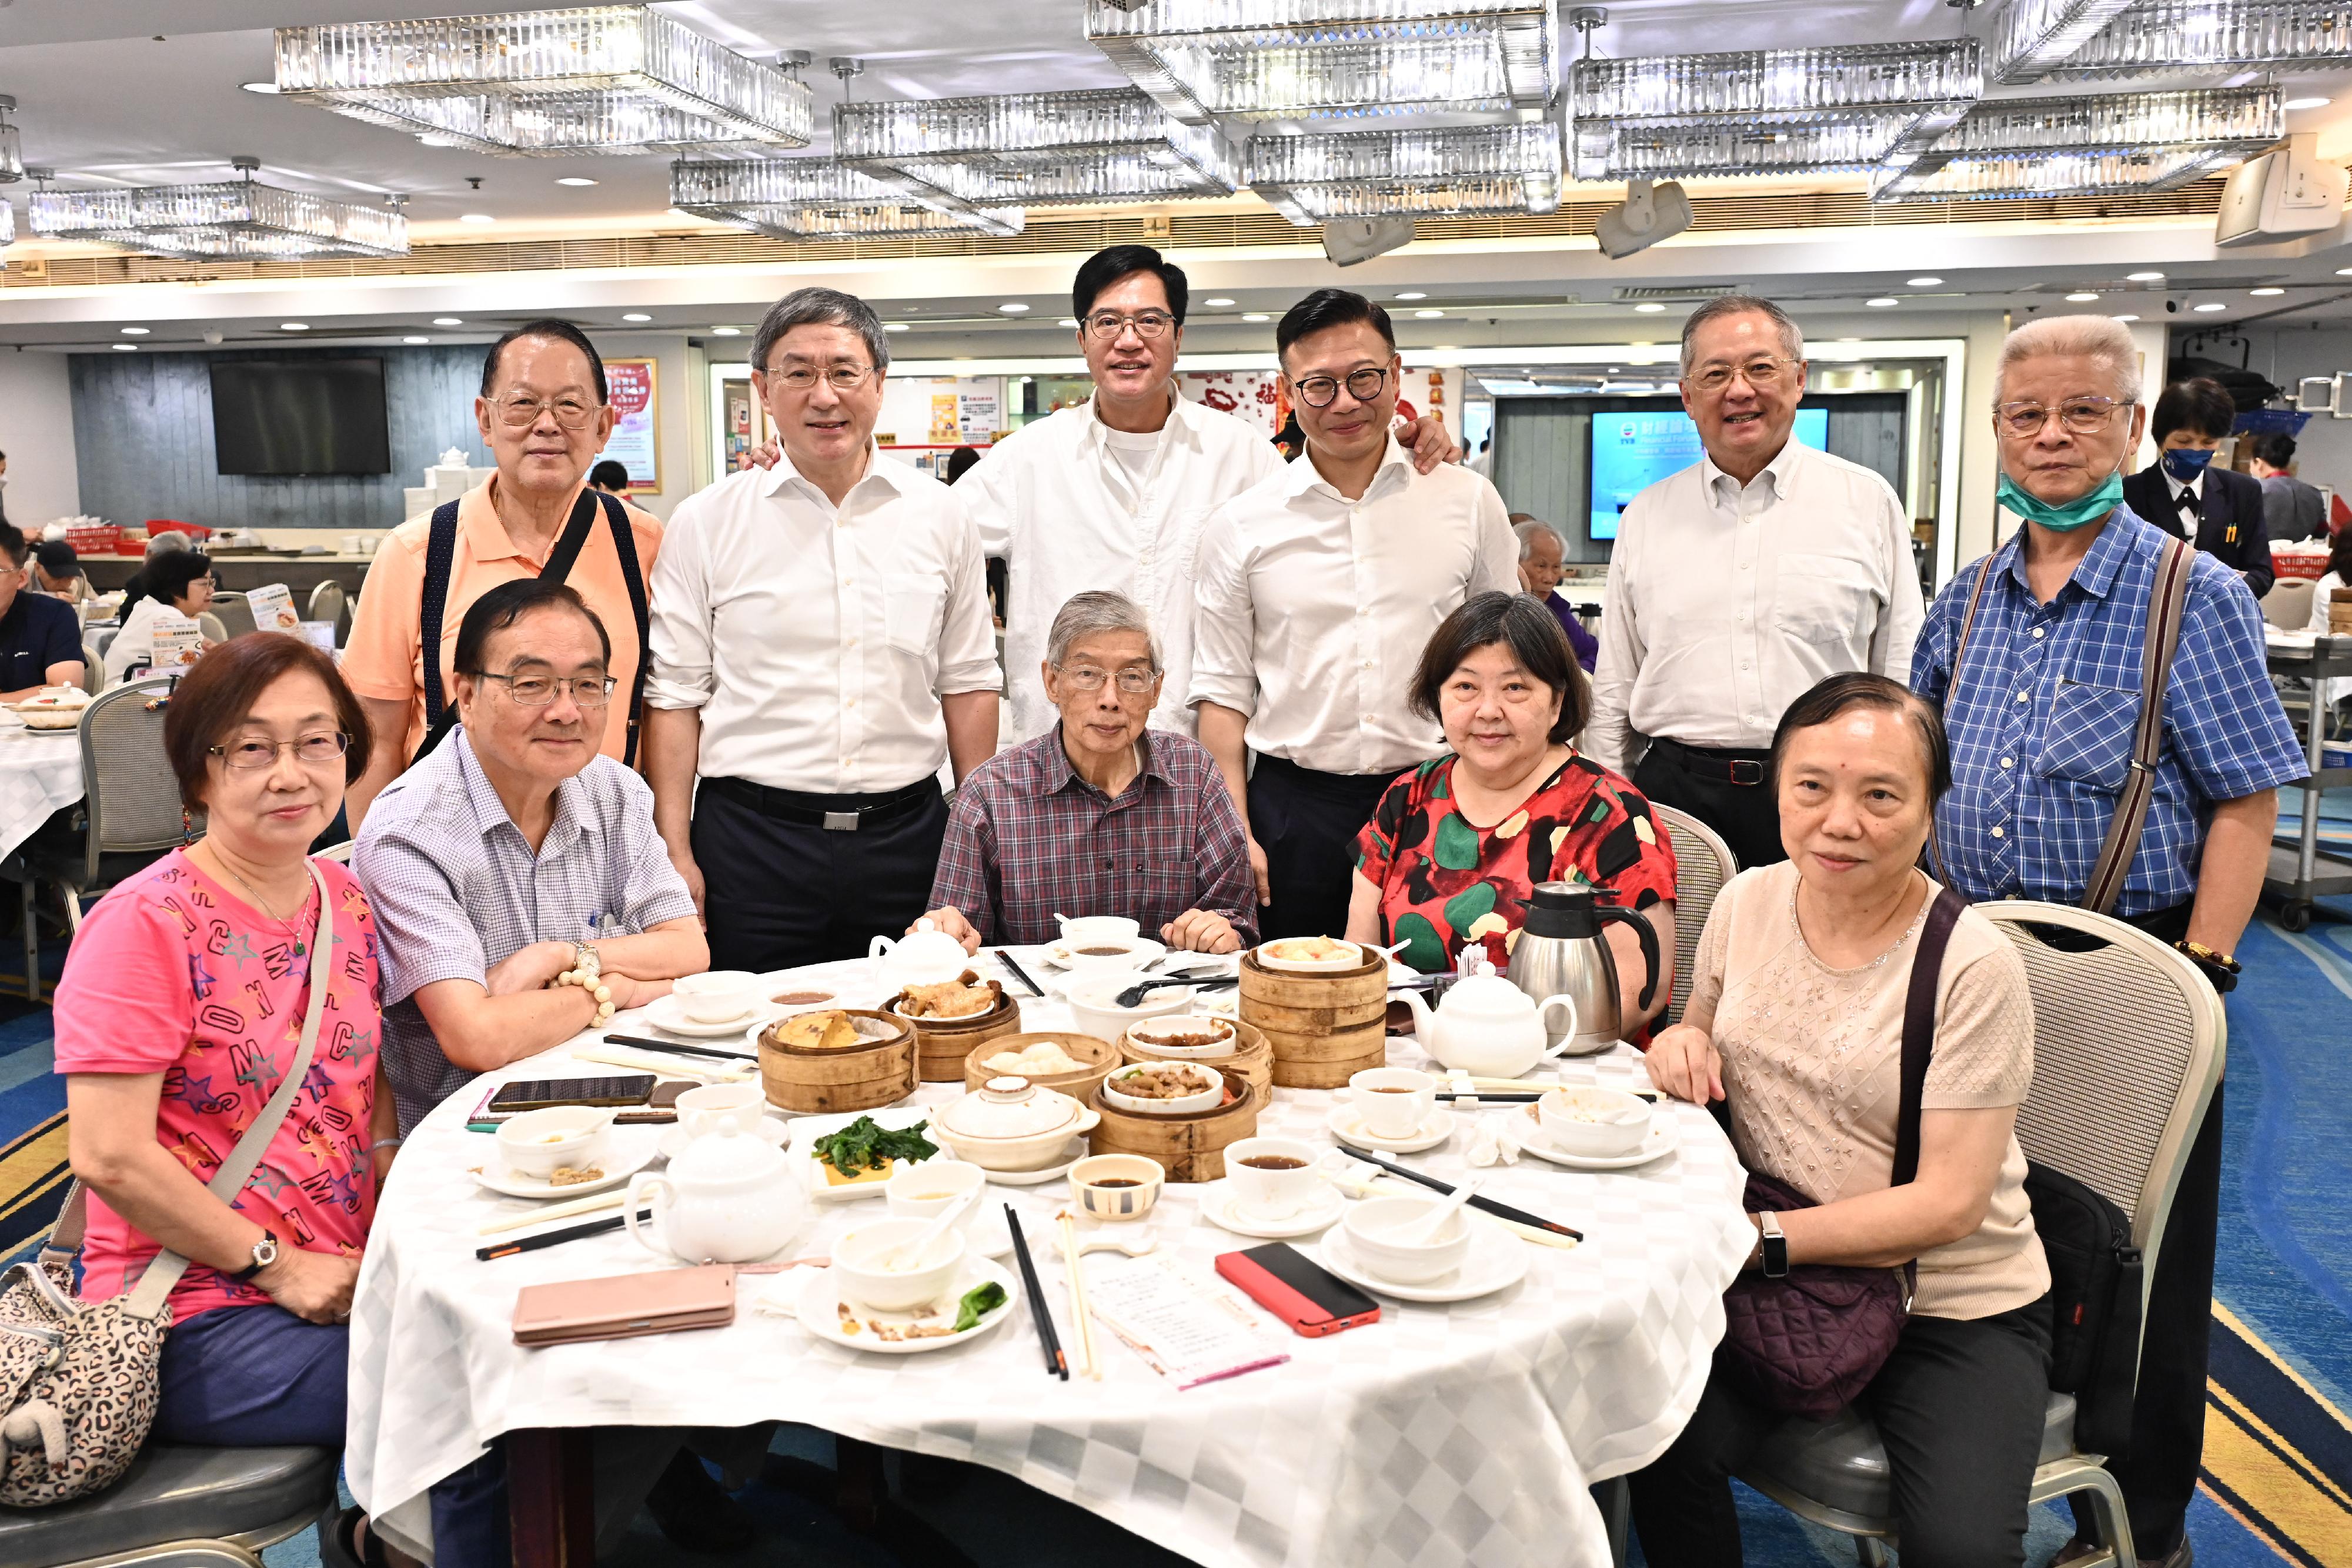 The Deputy Chief Secretary for Administration, Mr Cheuk Wing-hing (back row, second left); the Deputy Financial Secretary, Mr Michael Wong (back row, third left); and the Deputy Secretary for Justice, Mr Cheung Kwok-kwan (back row, third right), together with the Legislative Council Member (Catering), Mr Tommy Cheung (back row, second right), join a group photo with members of the public July 1 enjoying dining discounts at a North Point restaurant today (July 1).